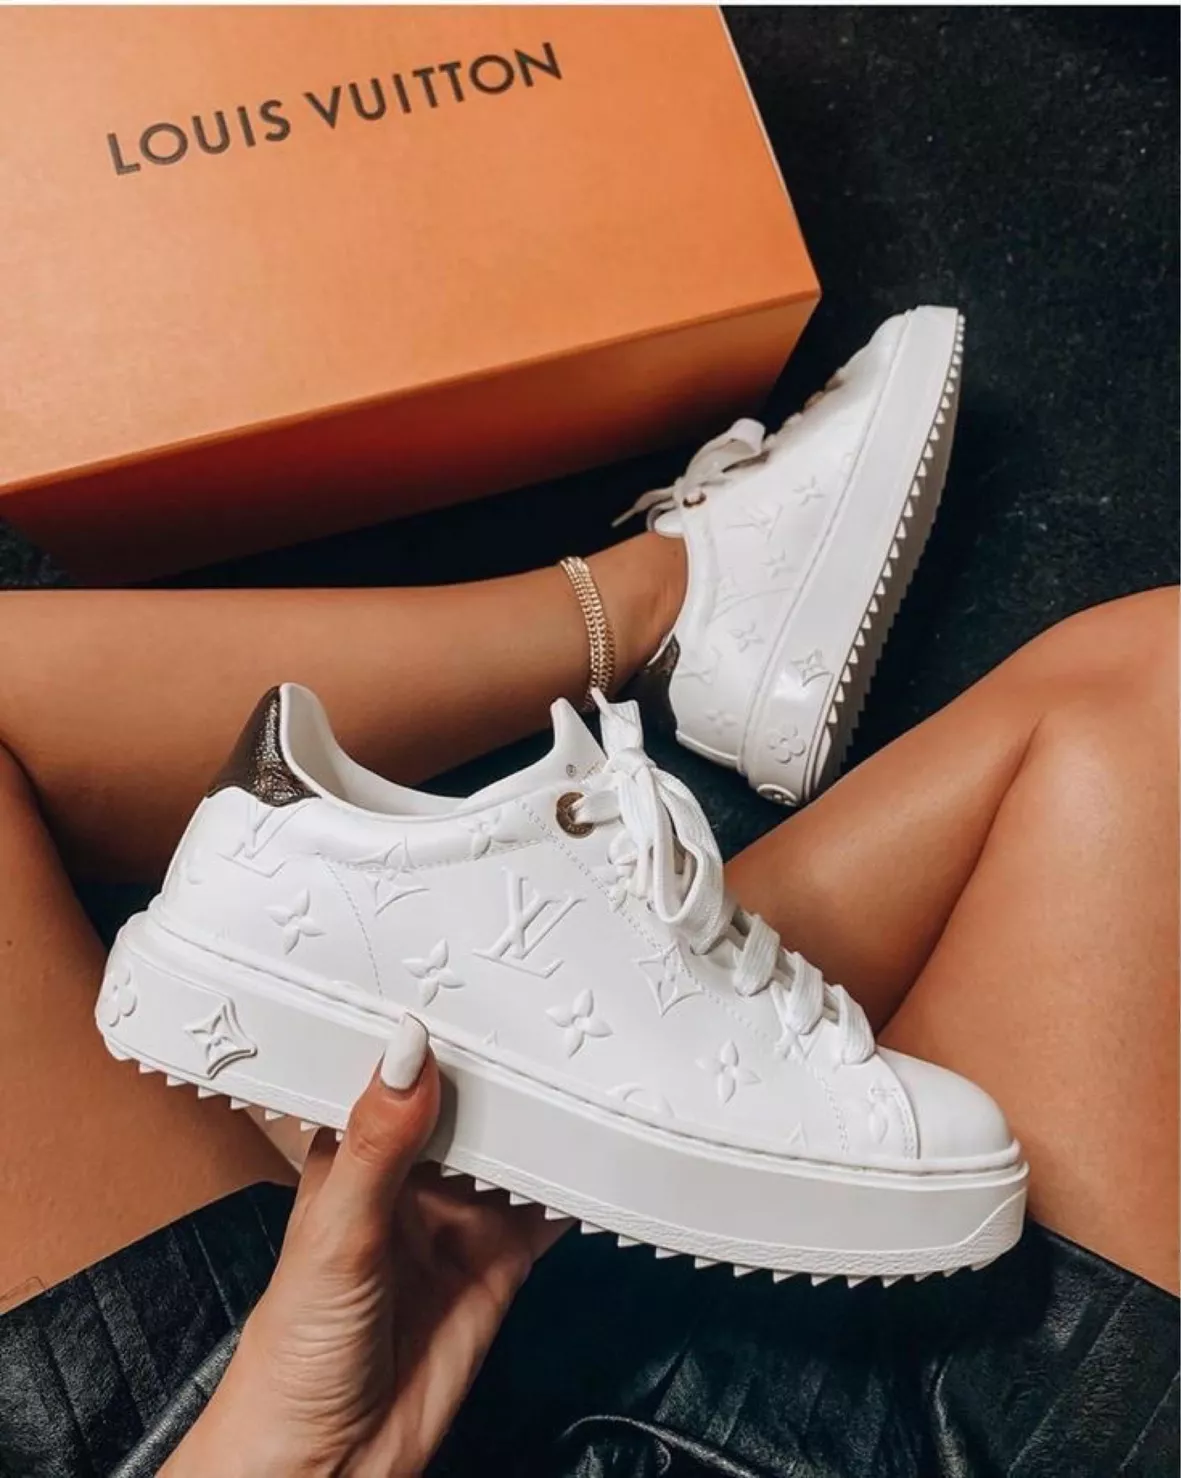 louis vuitton time out sneakers women